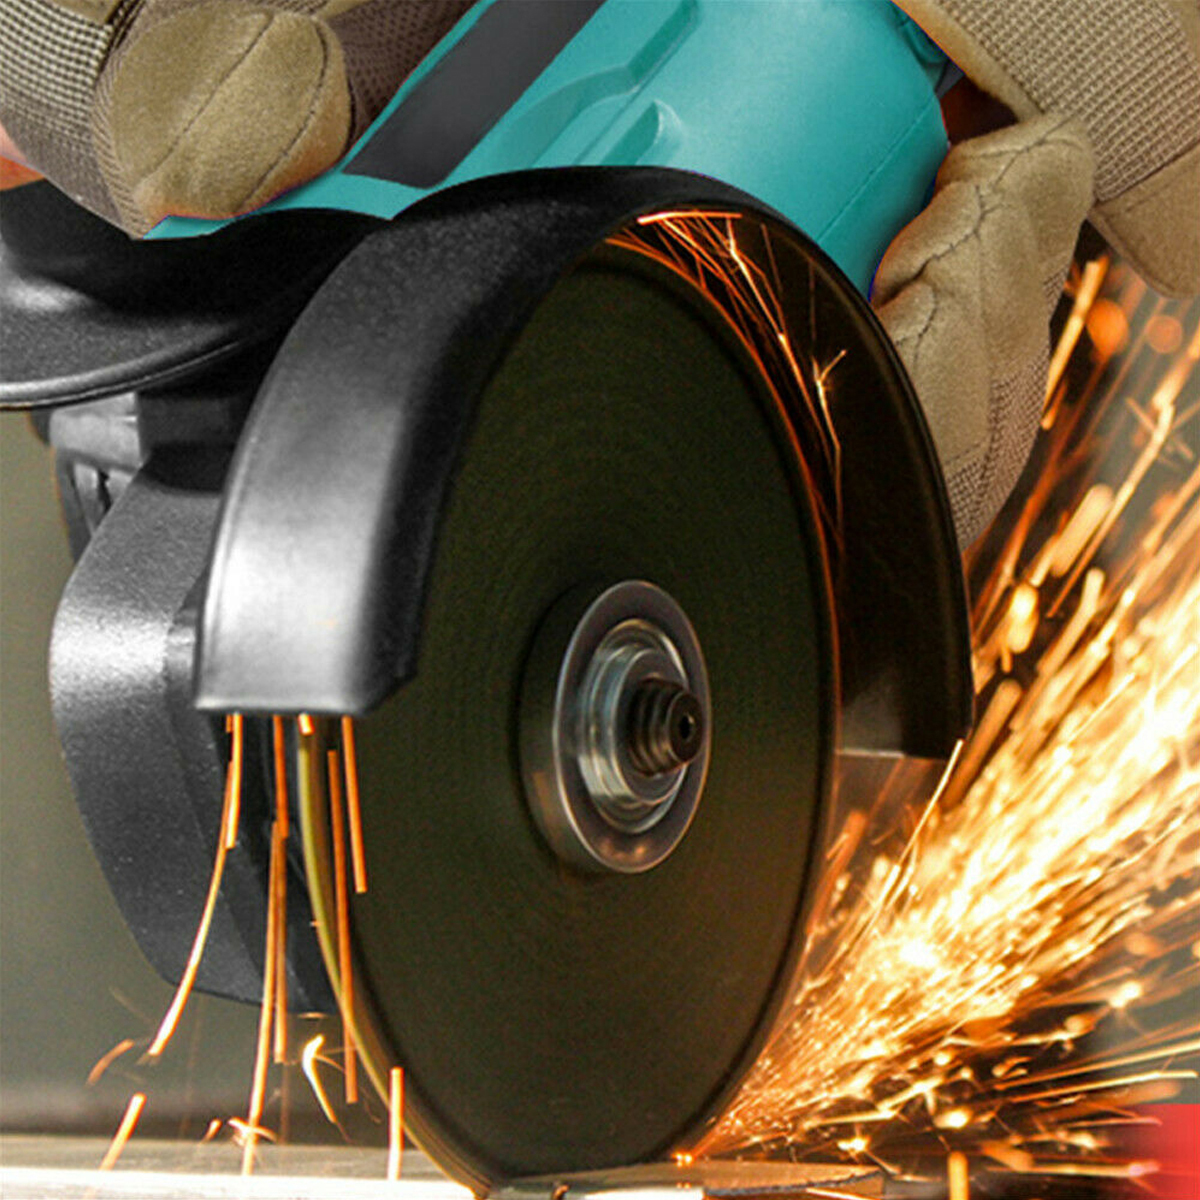 Rotary-Angle-Grinder-180deg-Rotation-Electric-Grinding-Tool-Fit-DAYI-Battery-1890602-5